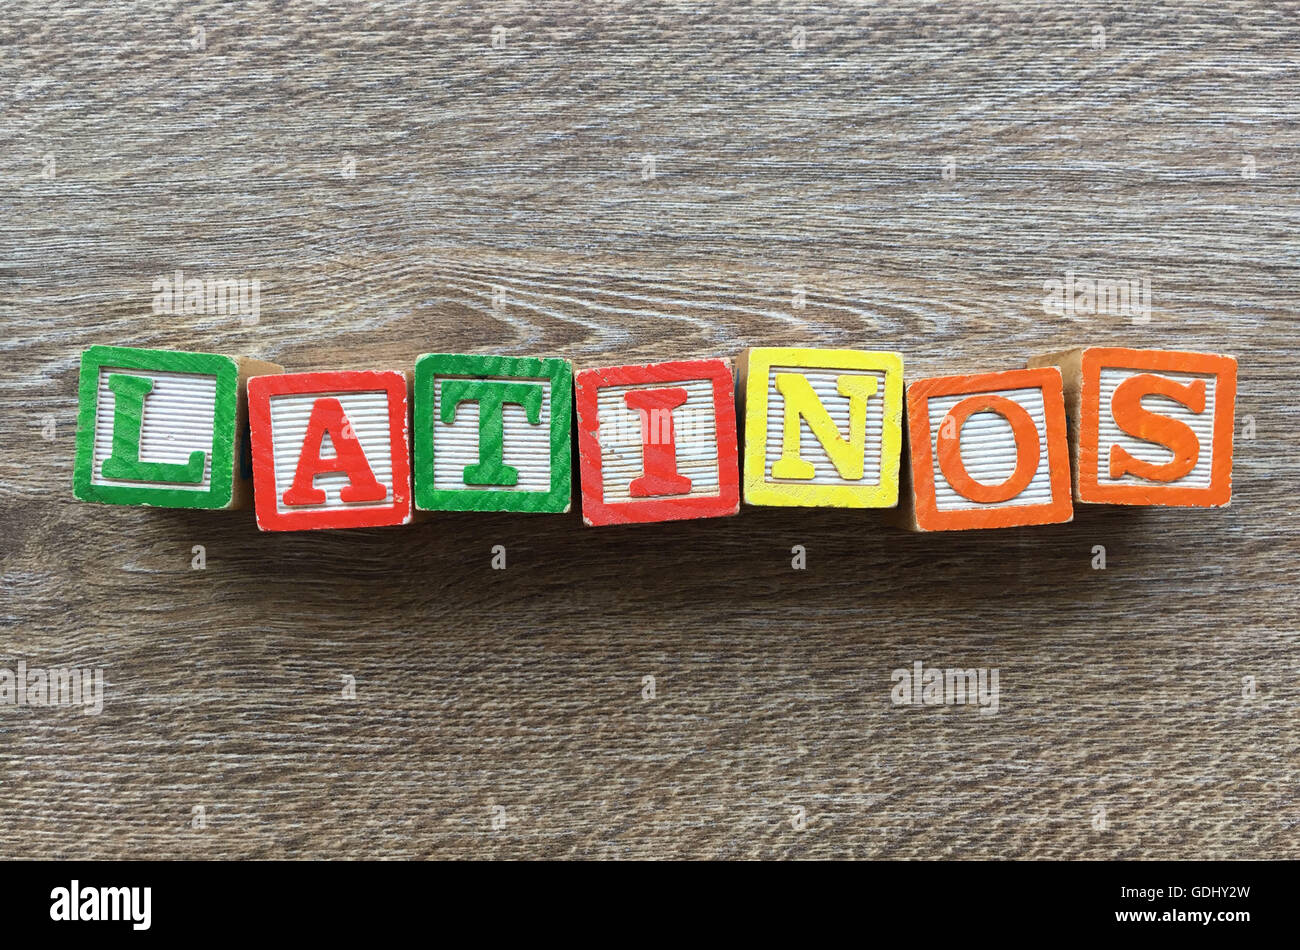 LATINOS word written with Alphabet wood block letter toys Stock Photo